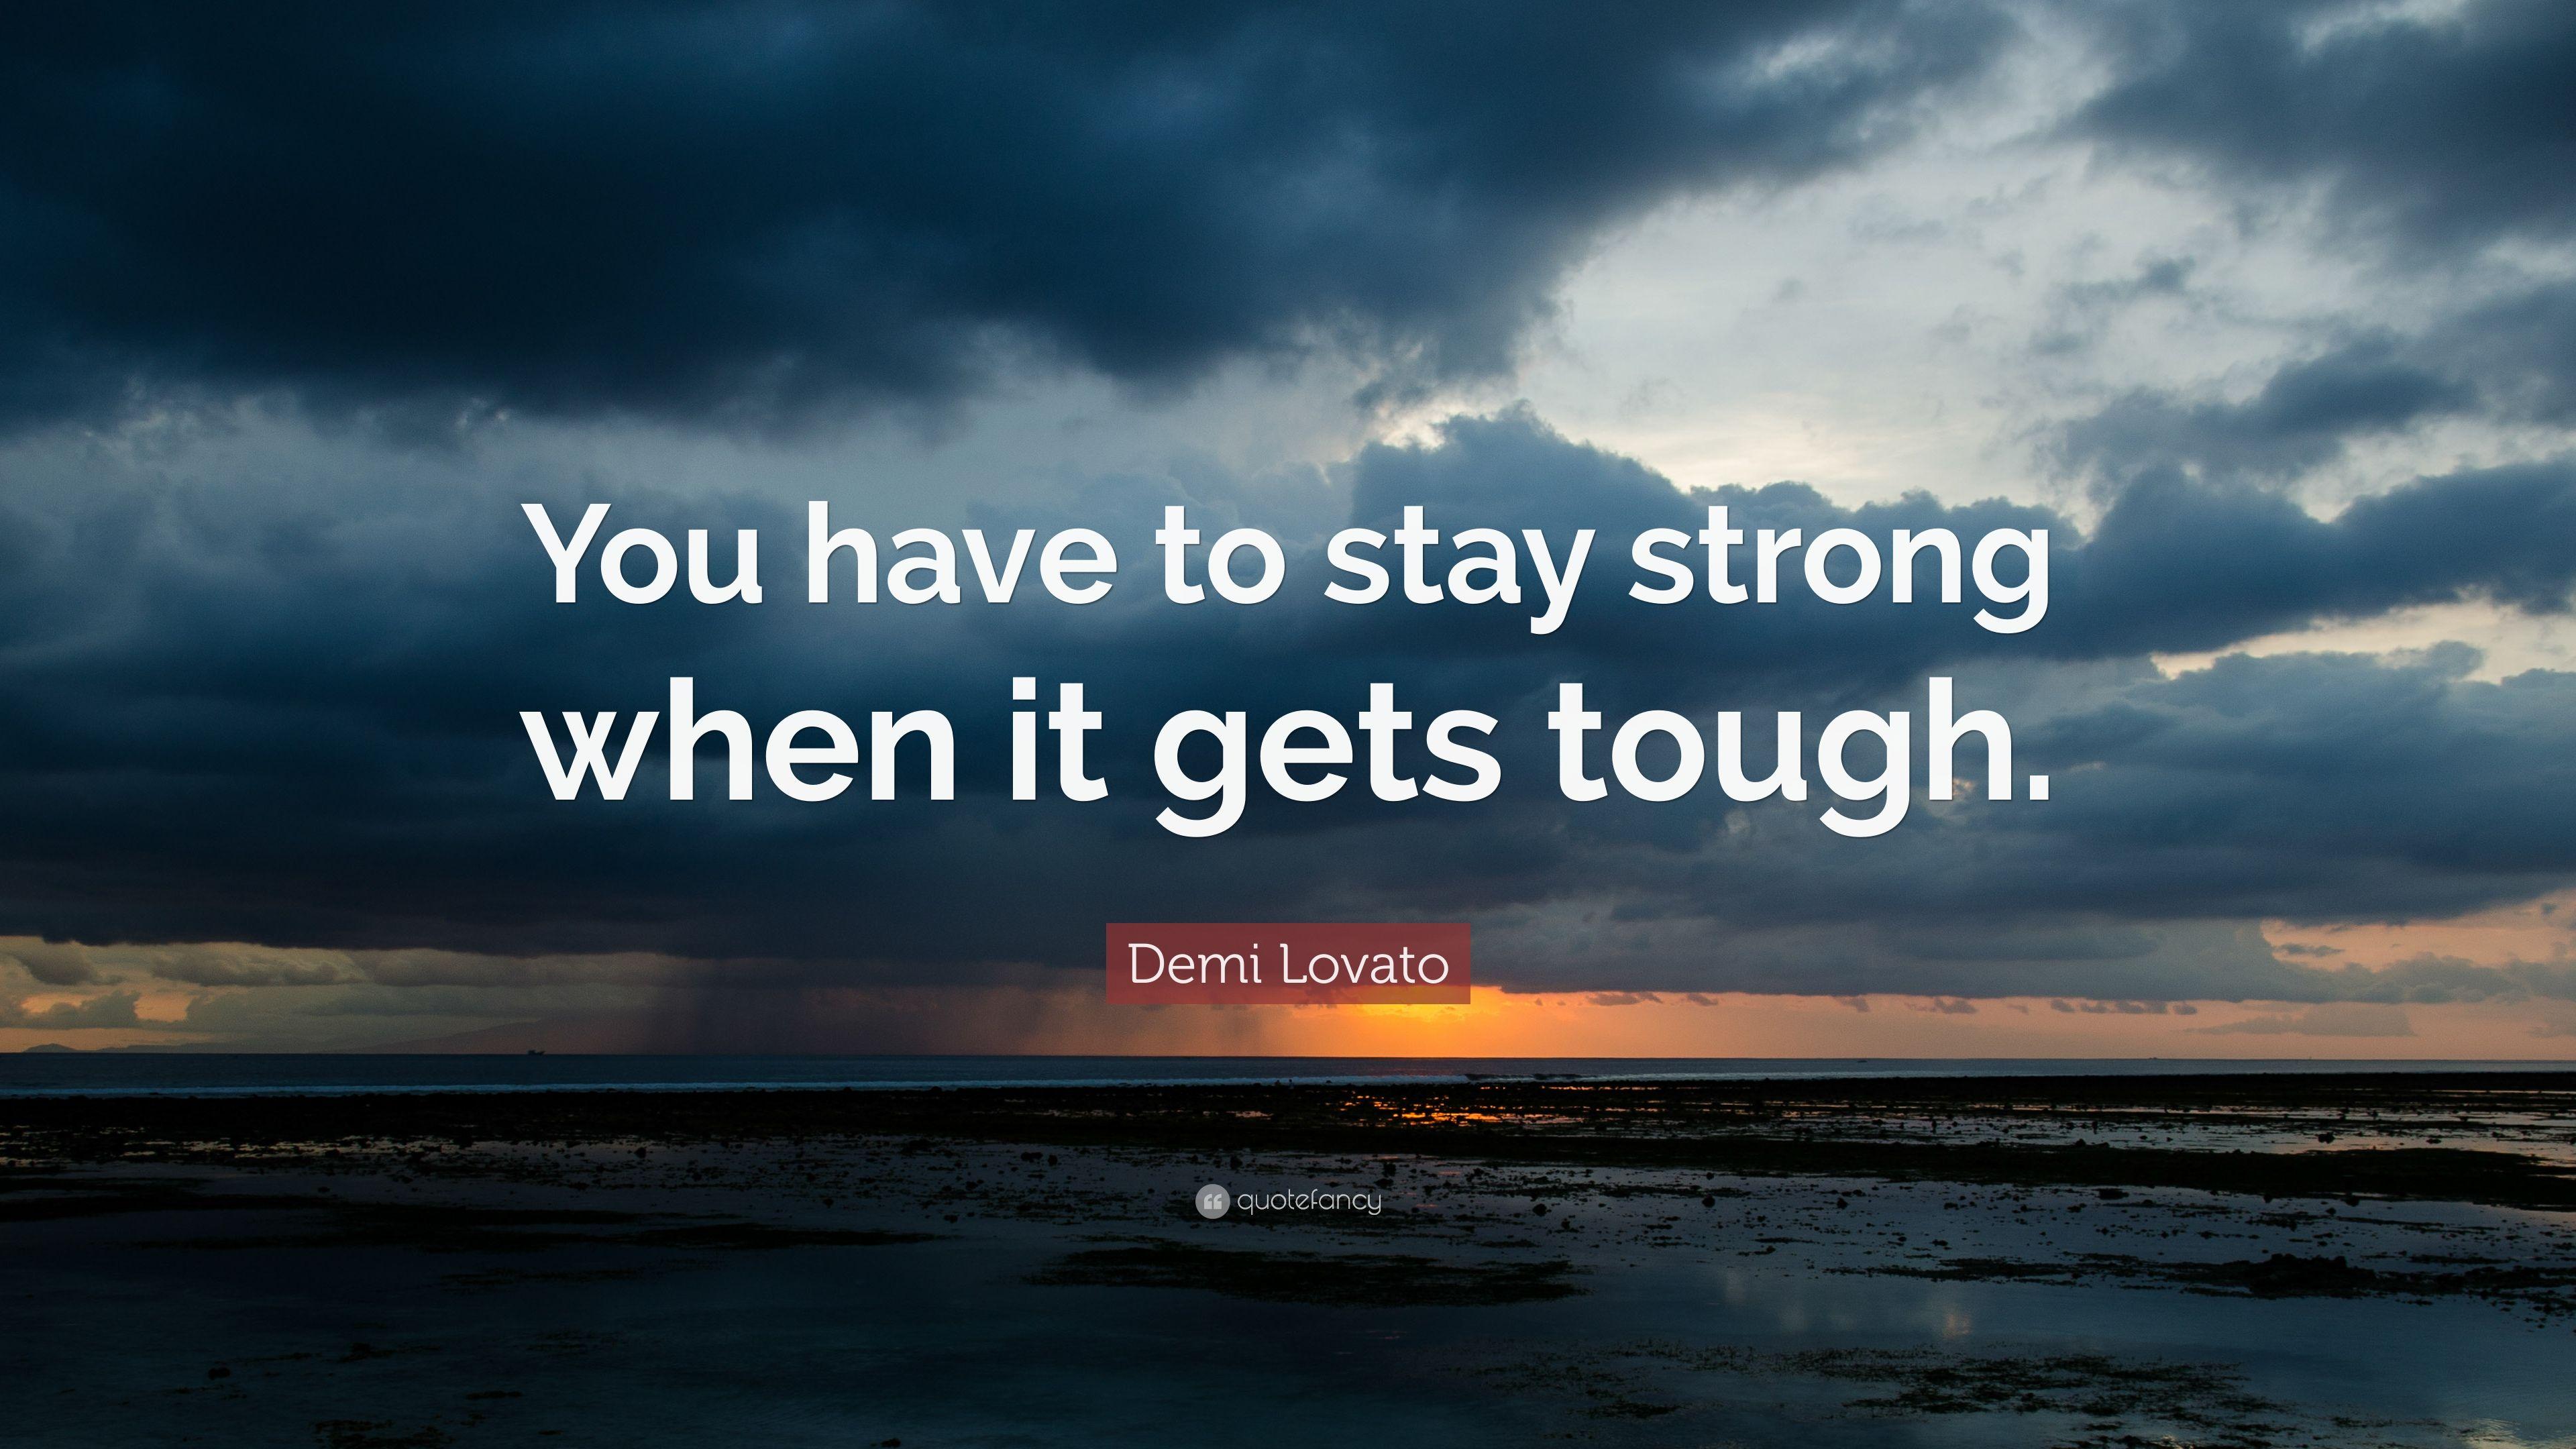 Demi Lovato Quote: “You have to stay strong when it gets tough.” 18